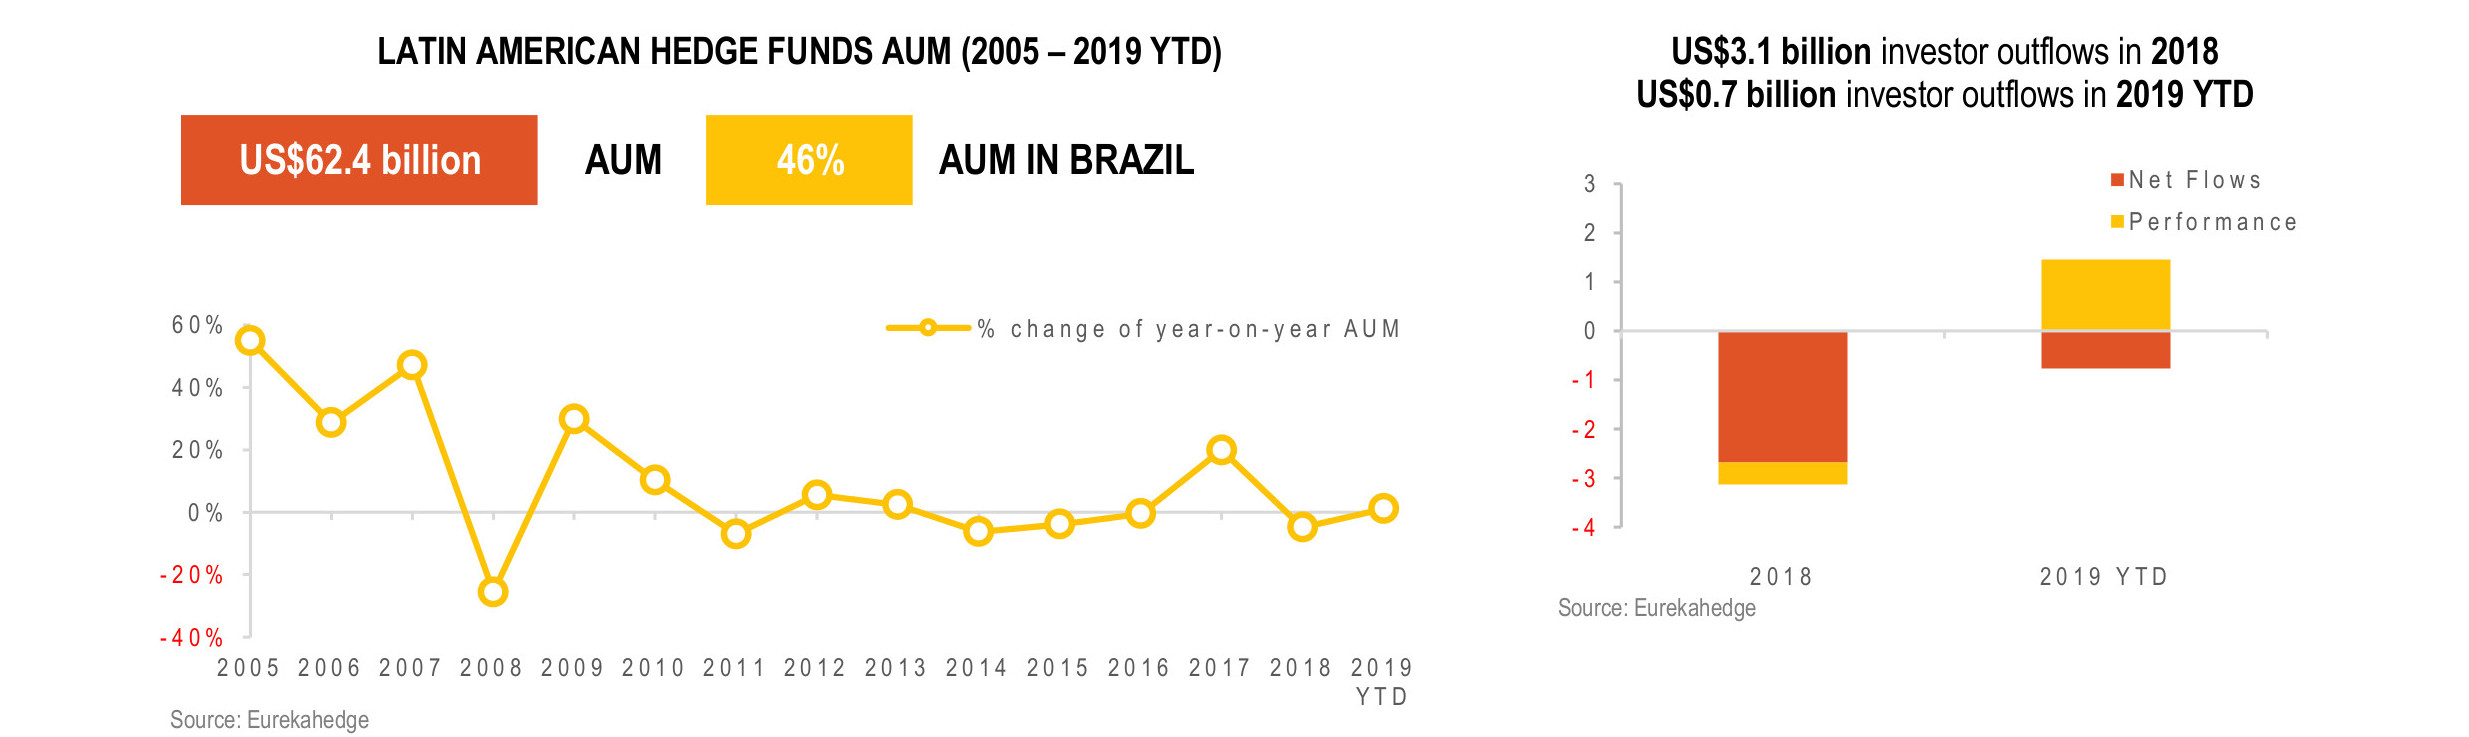 Latin American Hedge Funds Infographic May 2019 - AUM